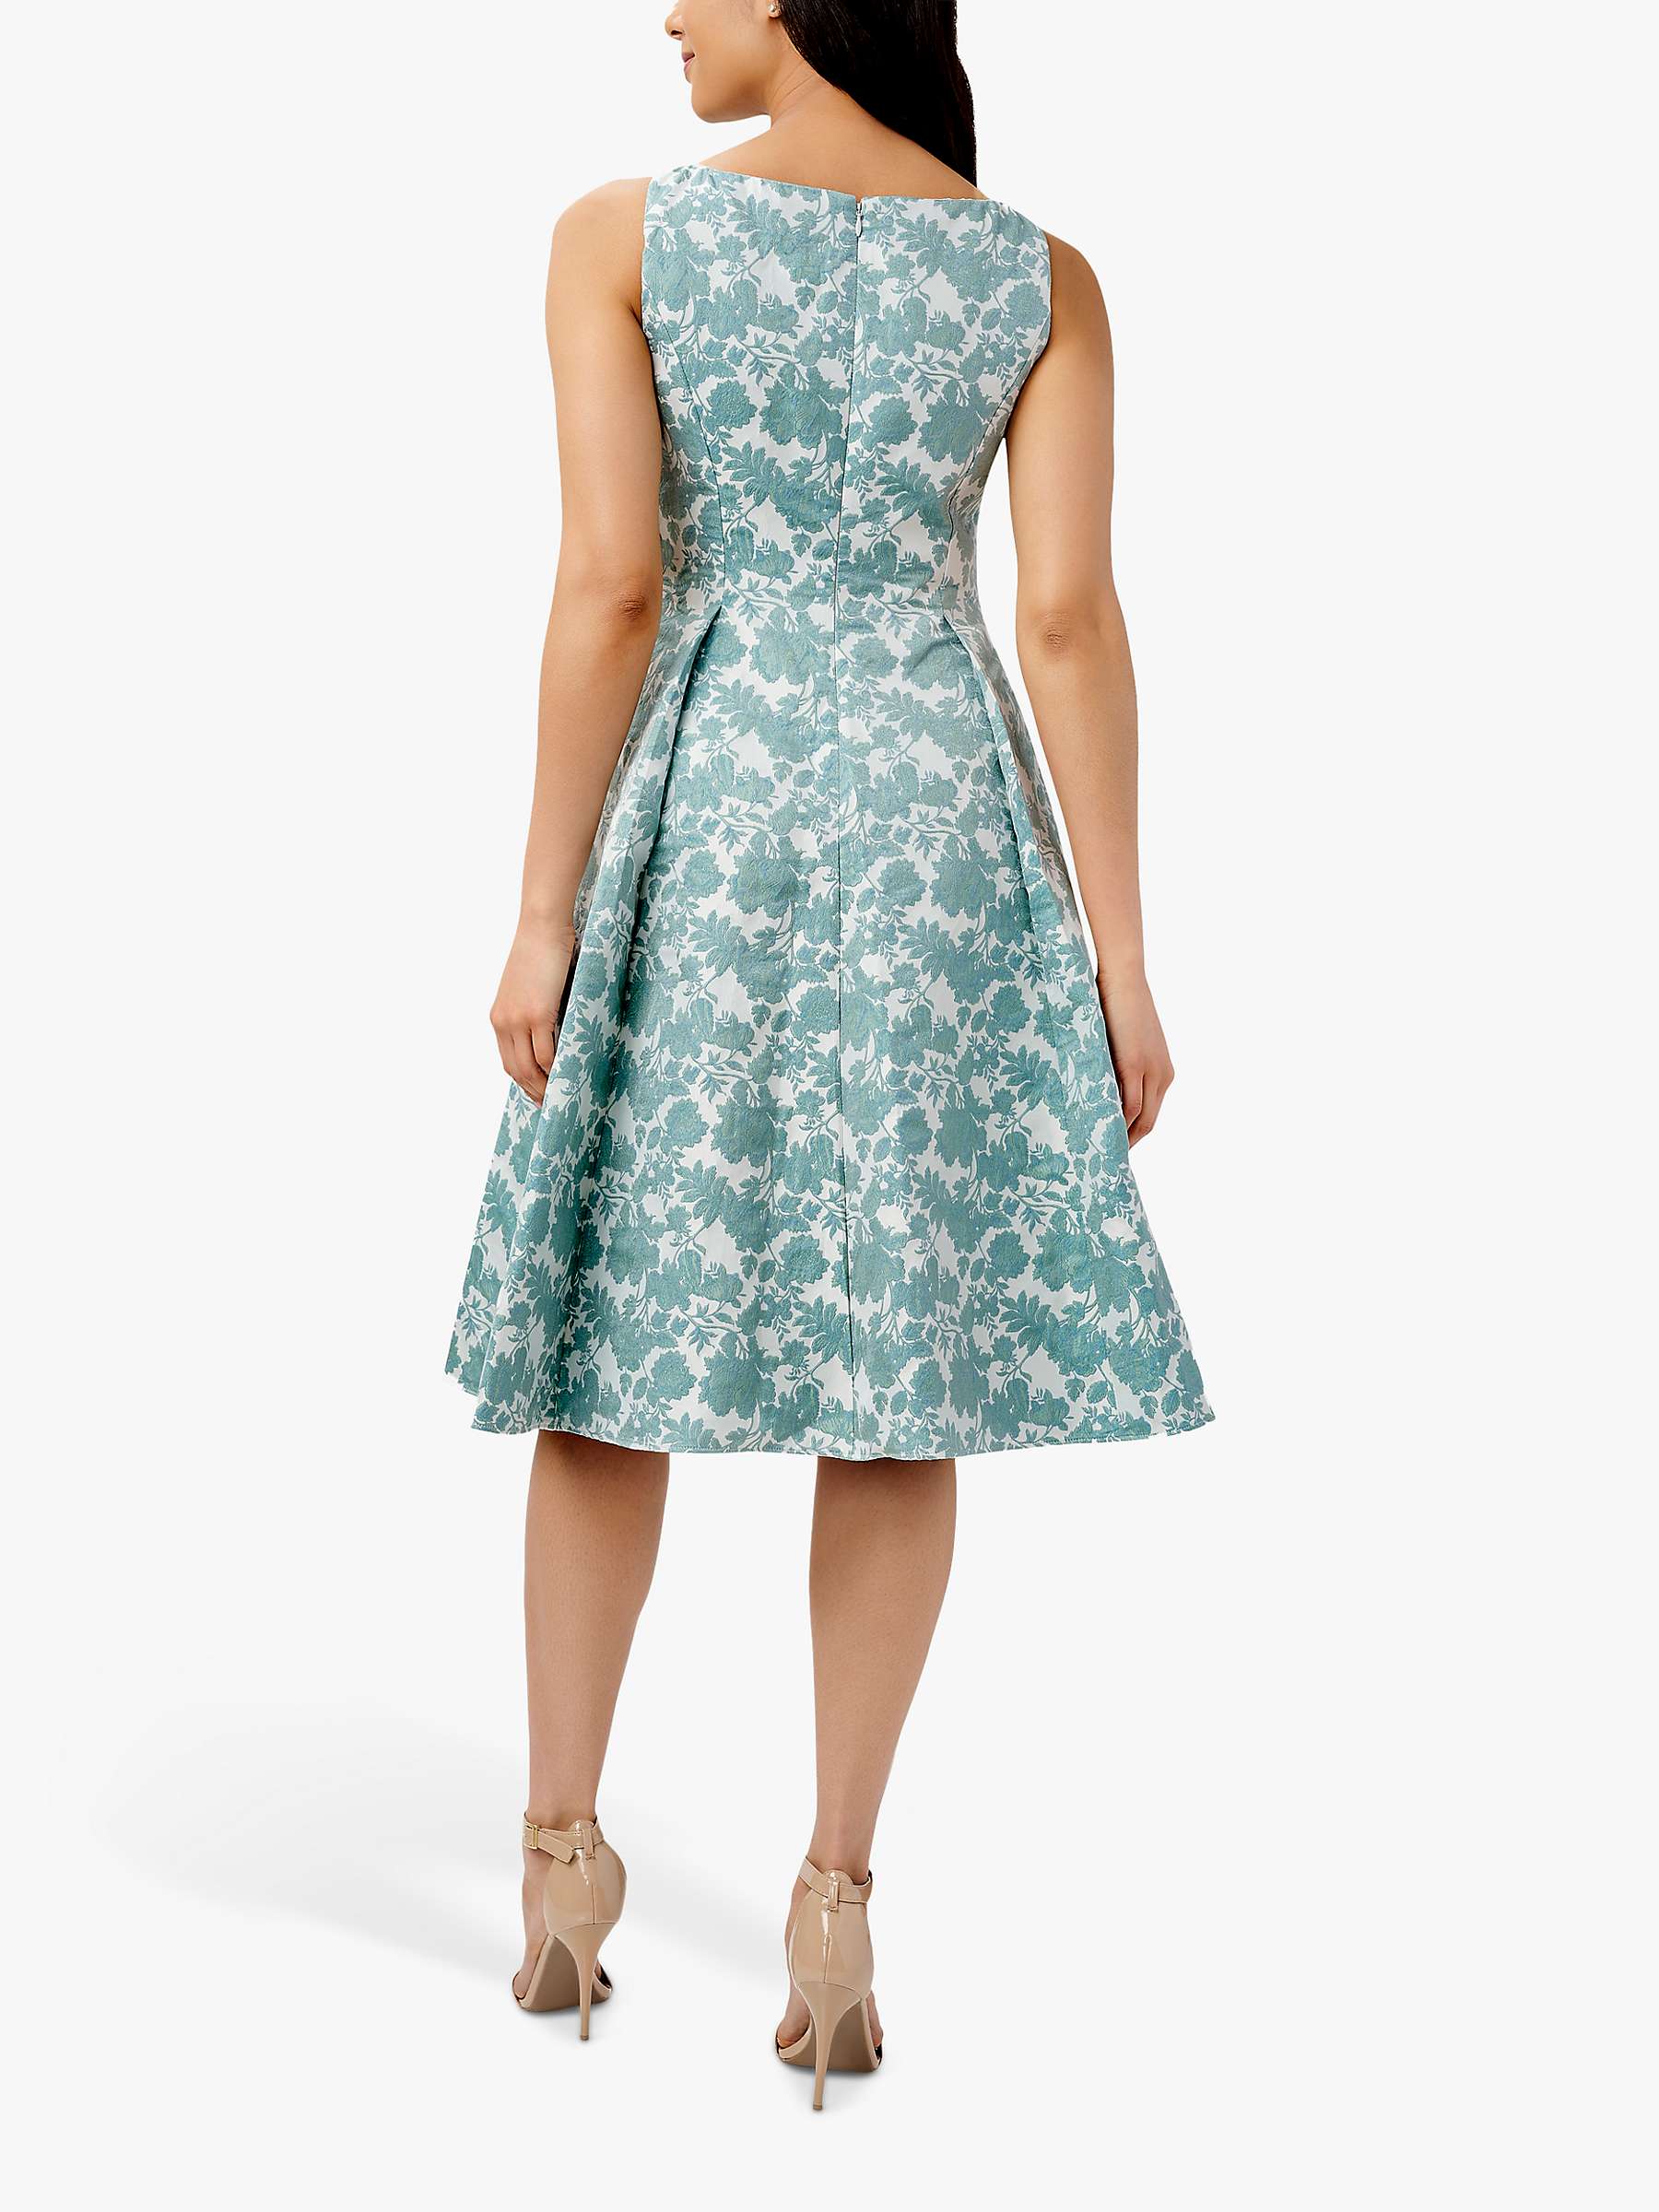 Buy Adrianna Papell Jacquard Fit and Flare Sleeveless Dress, Mint/Multi Online at johnlewis.com